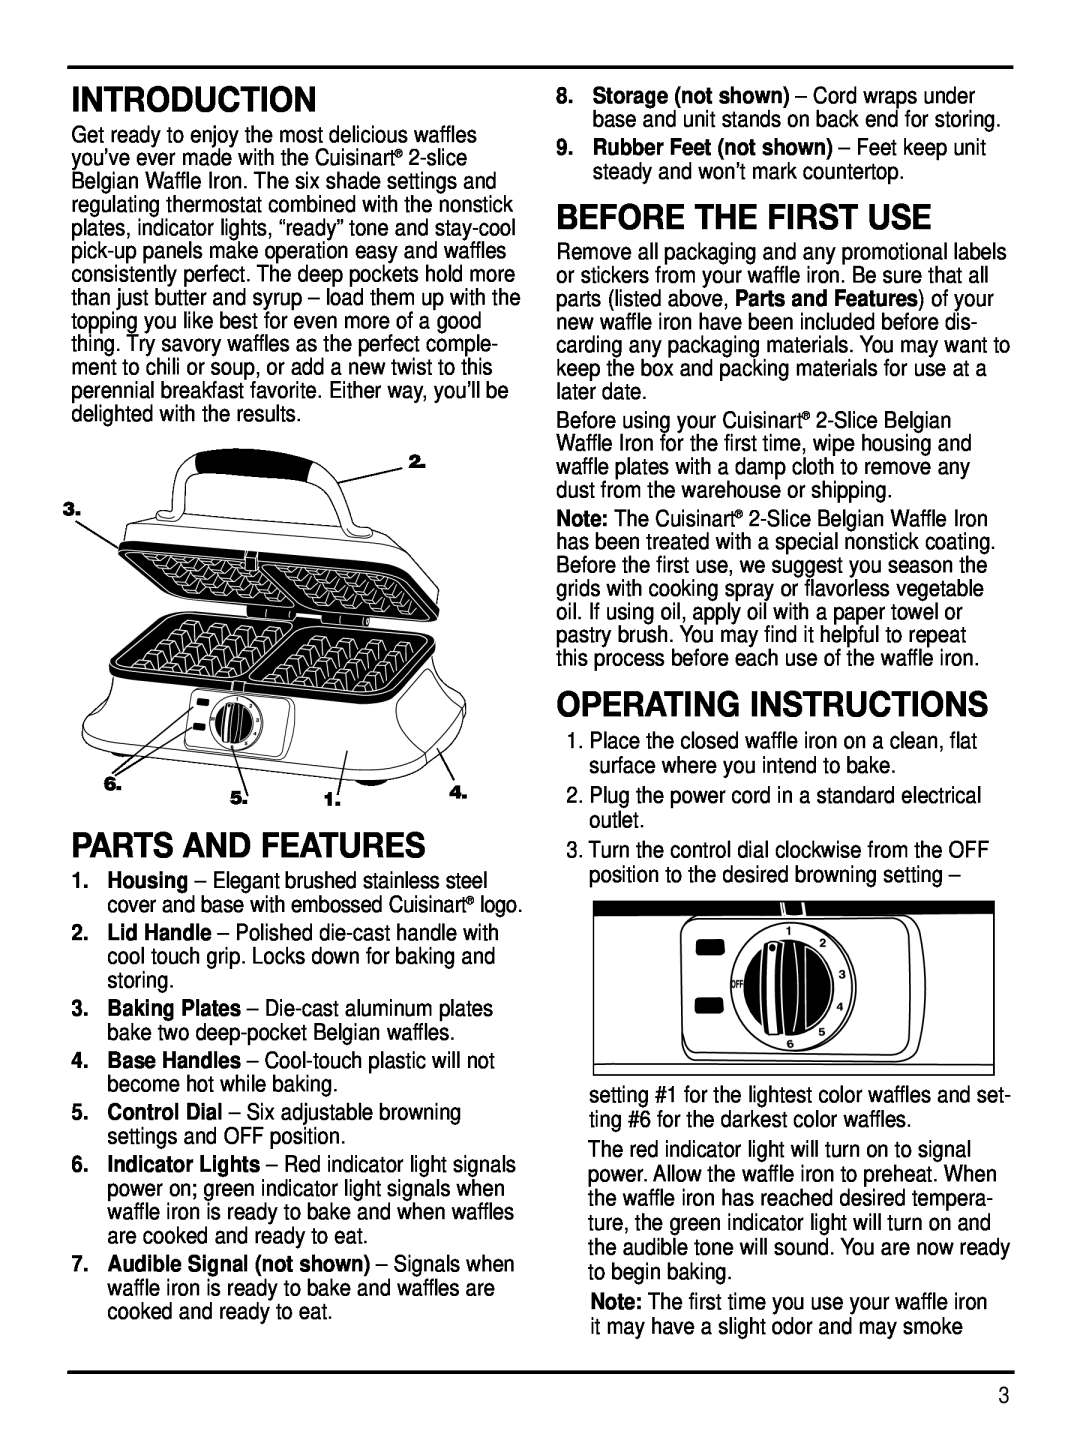 Cuisinart WAF-2B manual Introduction, Parts And Features, Before The First Use, Operating Instructions 